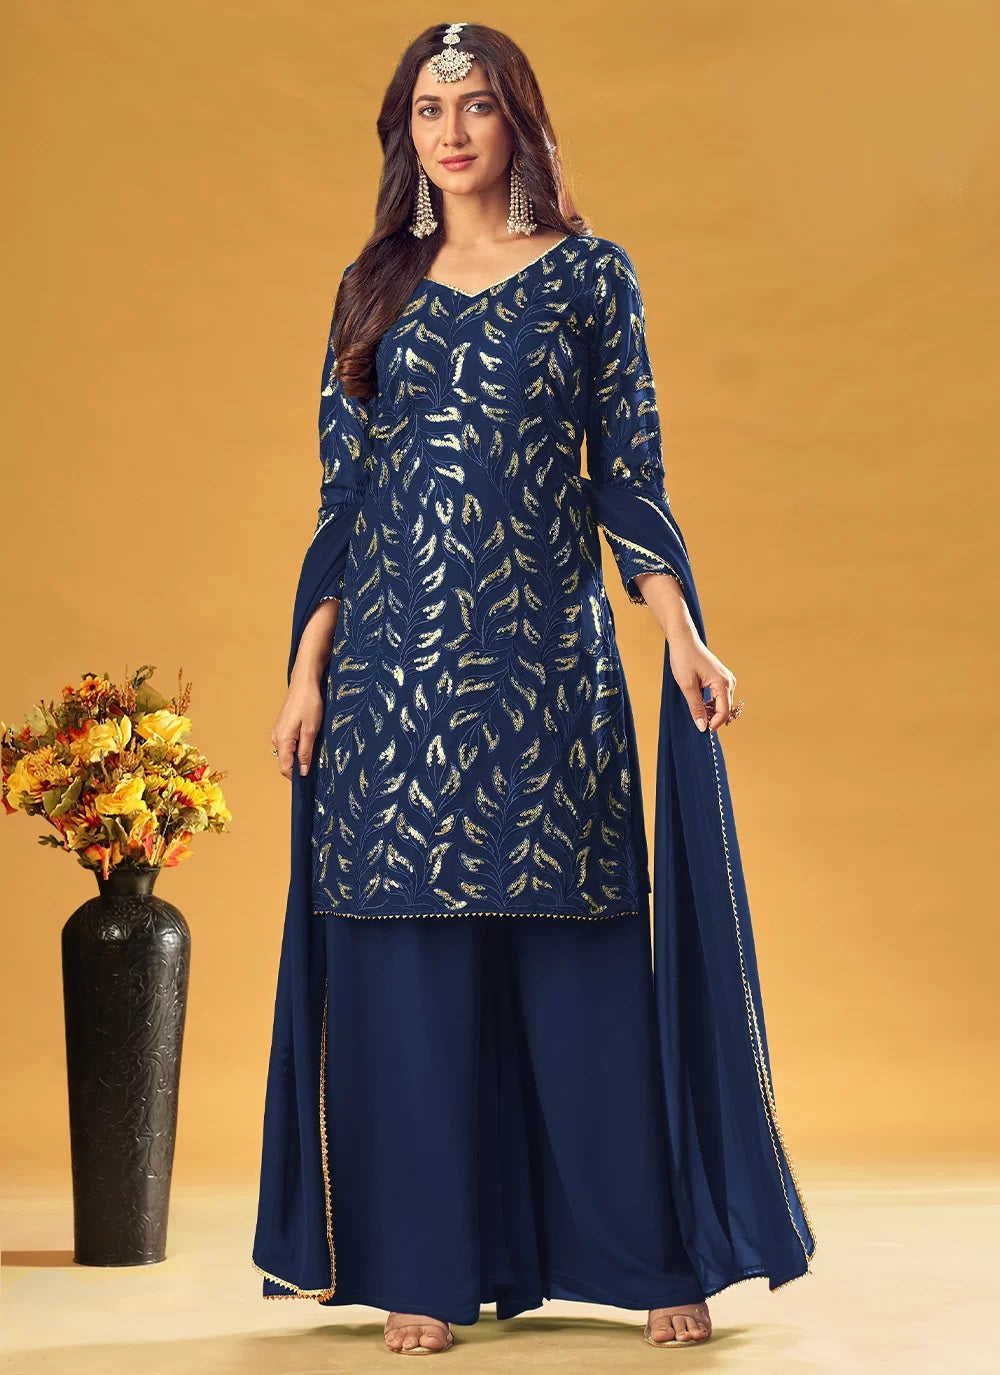 Bella Fancy Dresses Navy Blue Embroidered Faux Georgette Readymade Salwar Suit